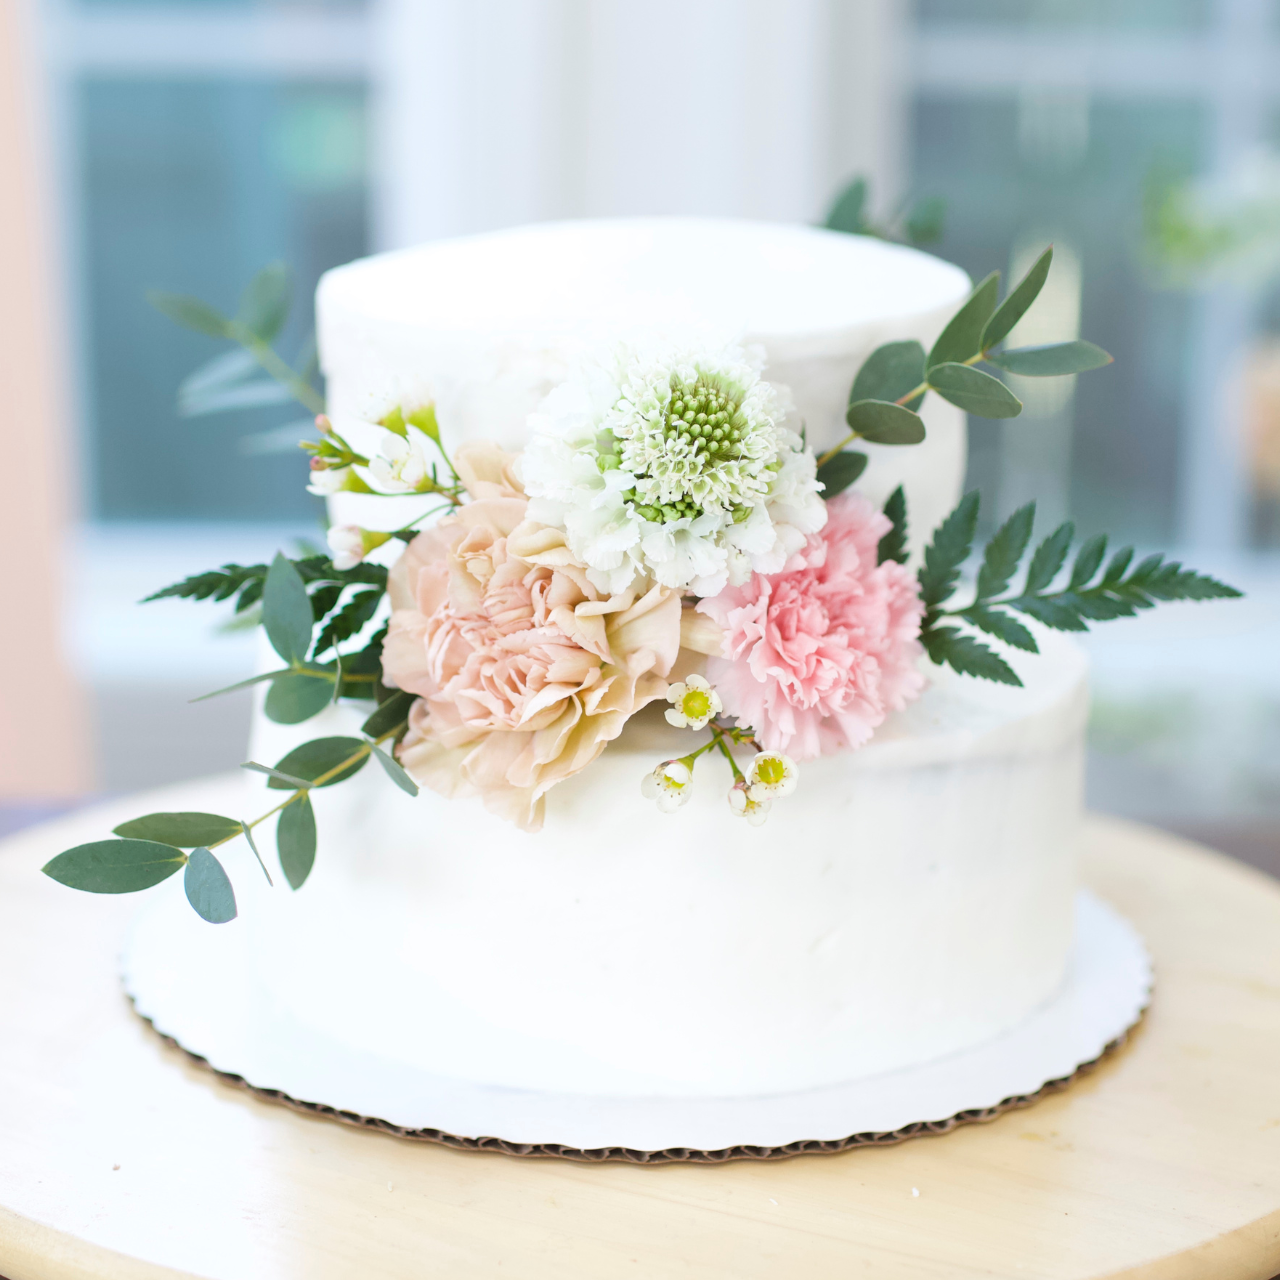 How to Put Flowers on a Cake